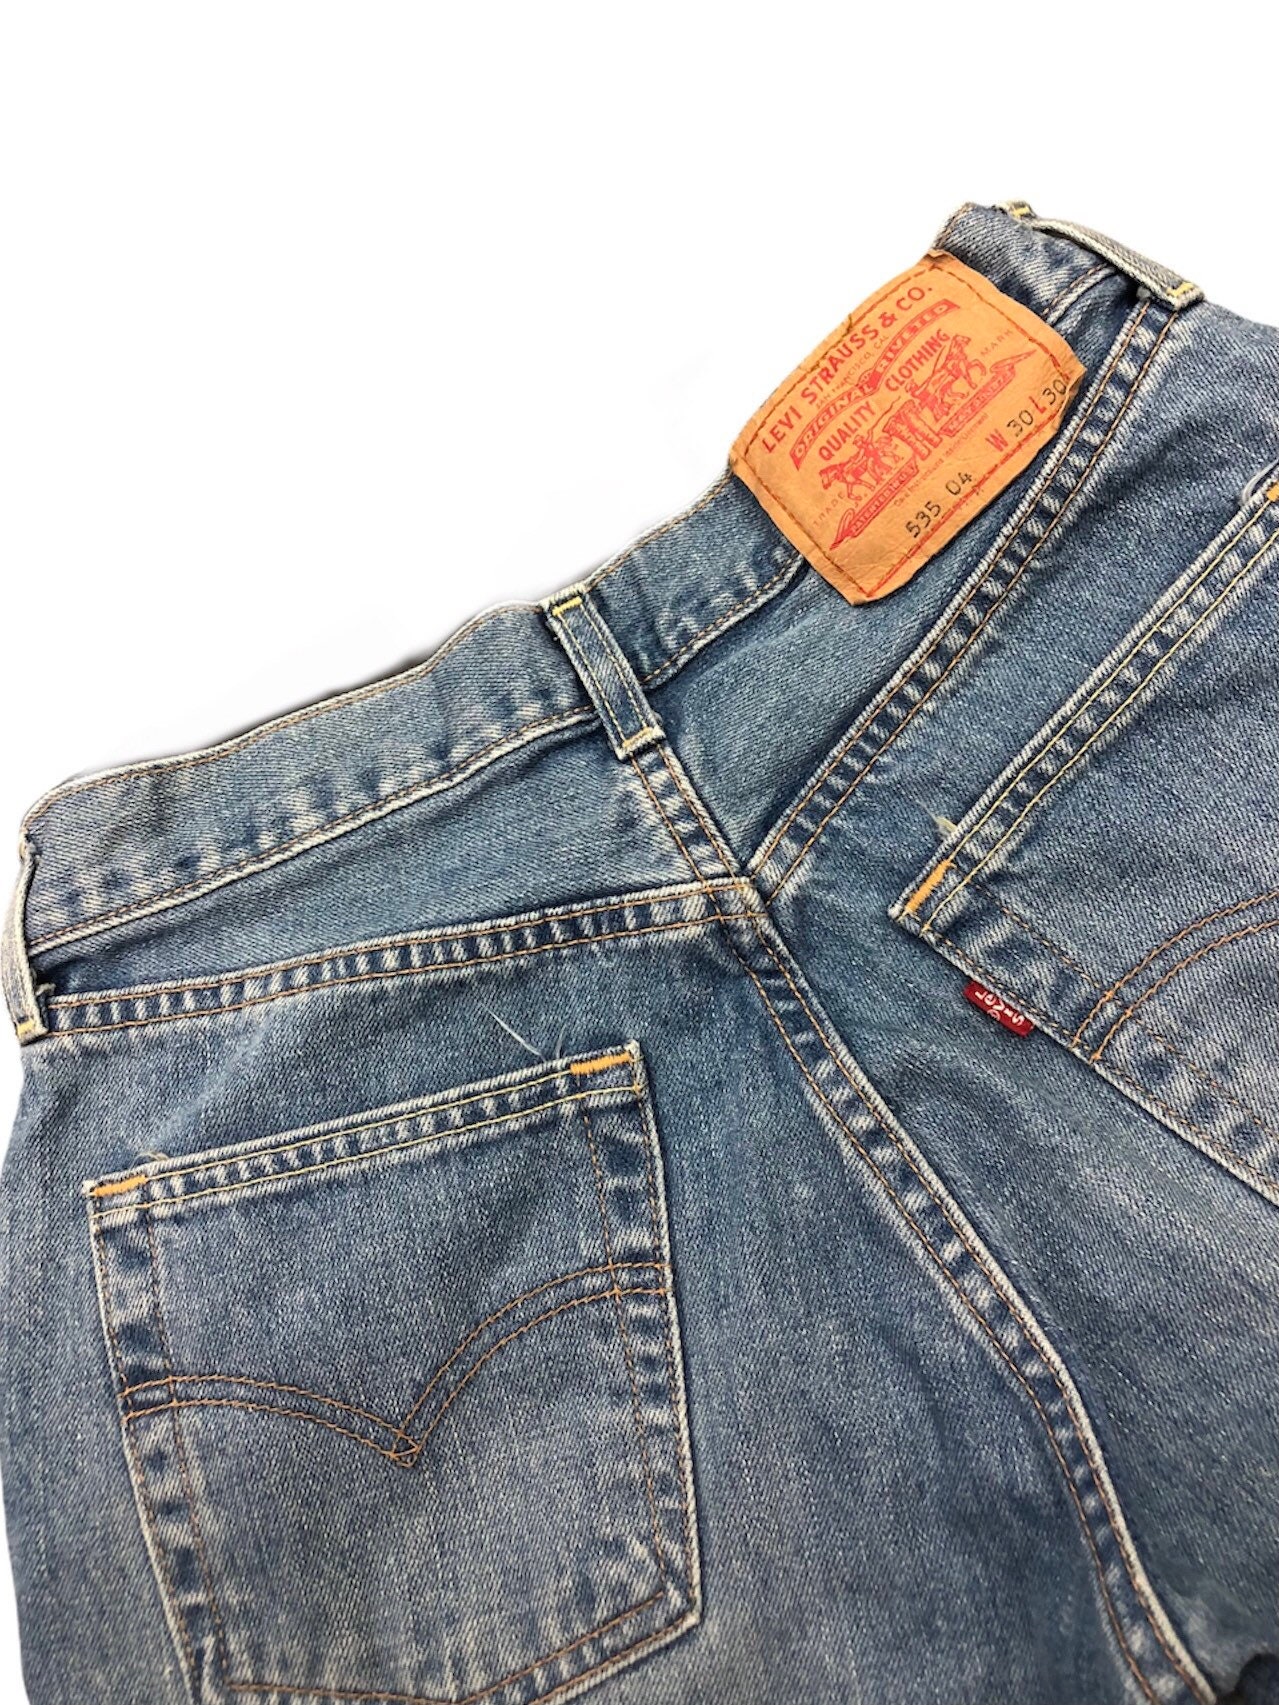 Vintage 90s Levis 28x28.5 Straight Leg Jeans in Etsy